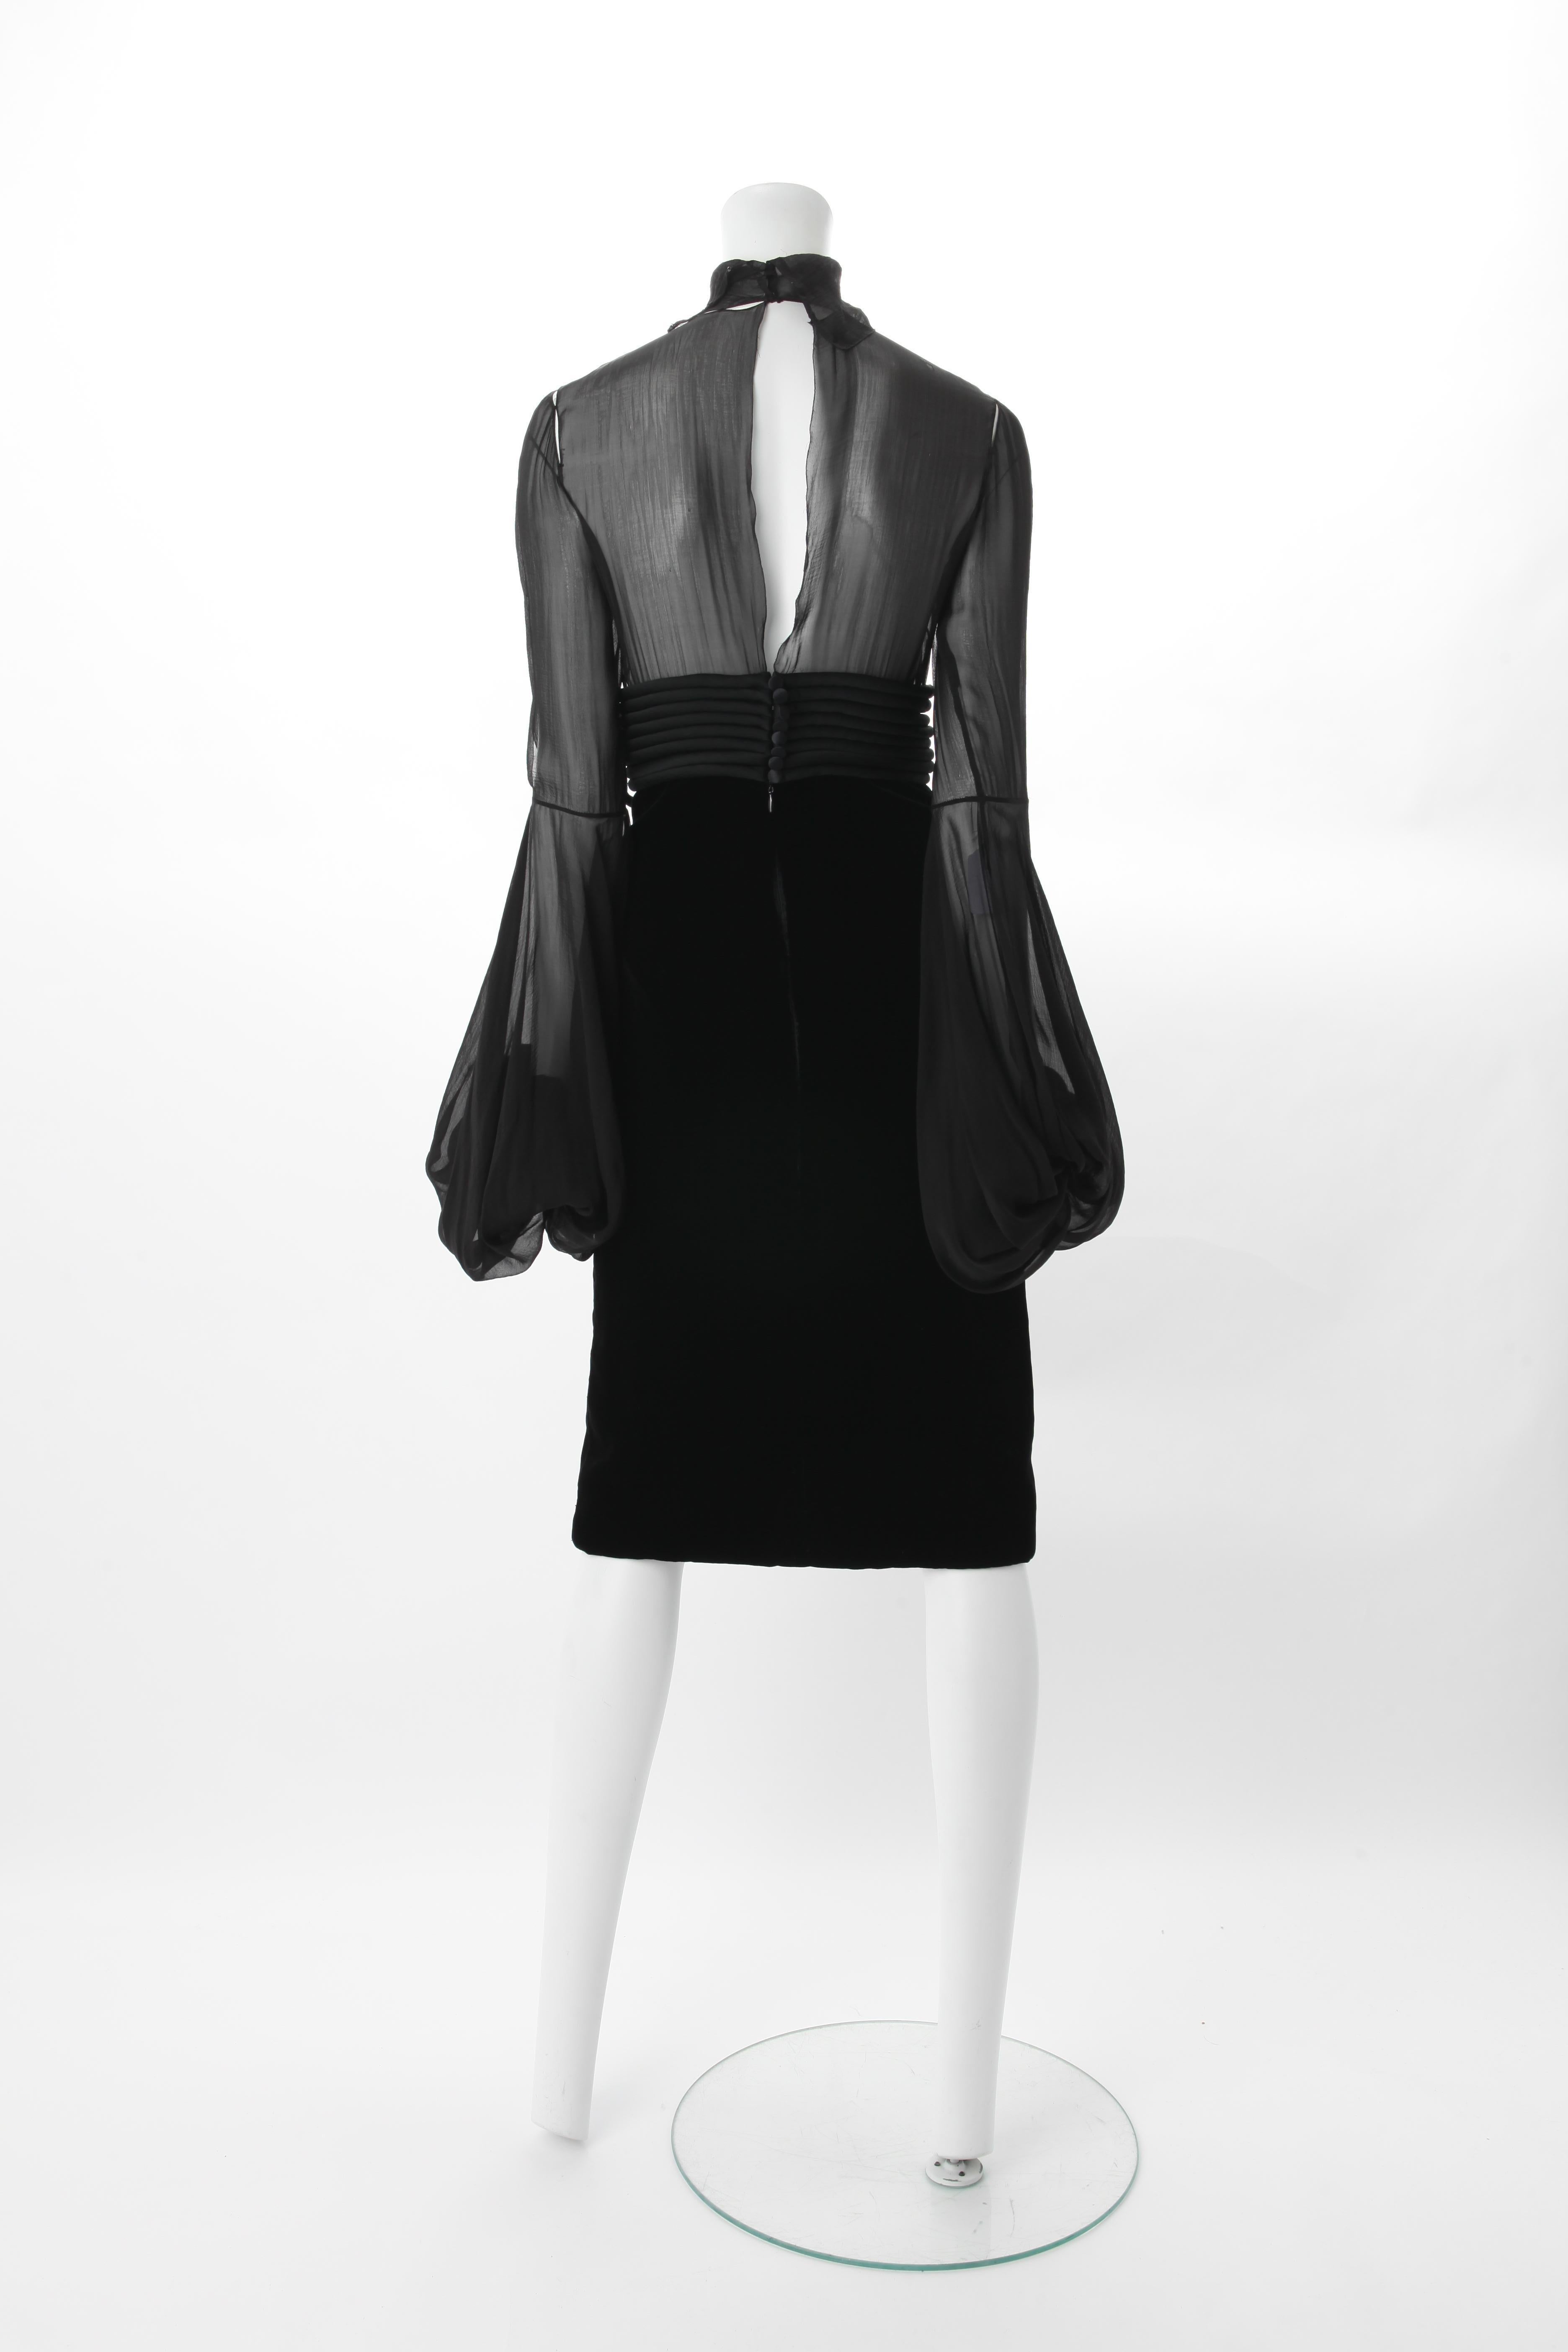 Jean-Louis Scherrer by Stephane Rolland Black Dress w/ Rouleux Waistband, A/W 2003.
Knee length black dress with velvet skirt and turtleneck sheer silk bodice featuring long bishop sleeves. Dress also features a Rouleux high waistband and bow tie